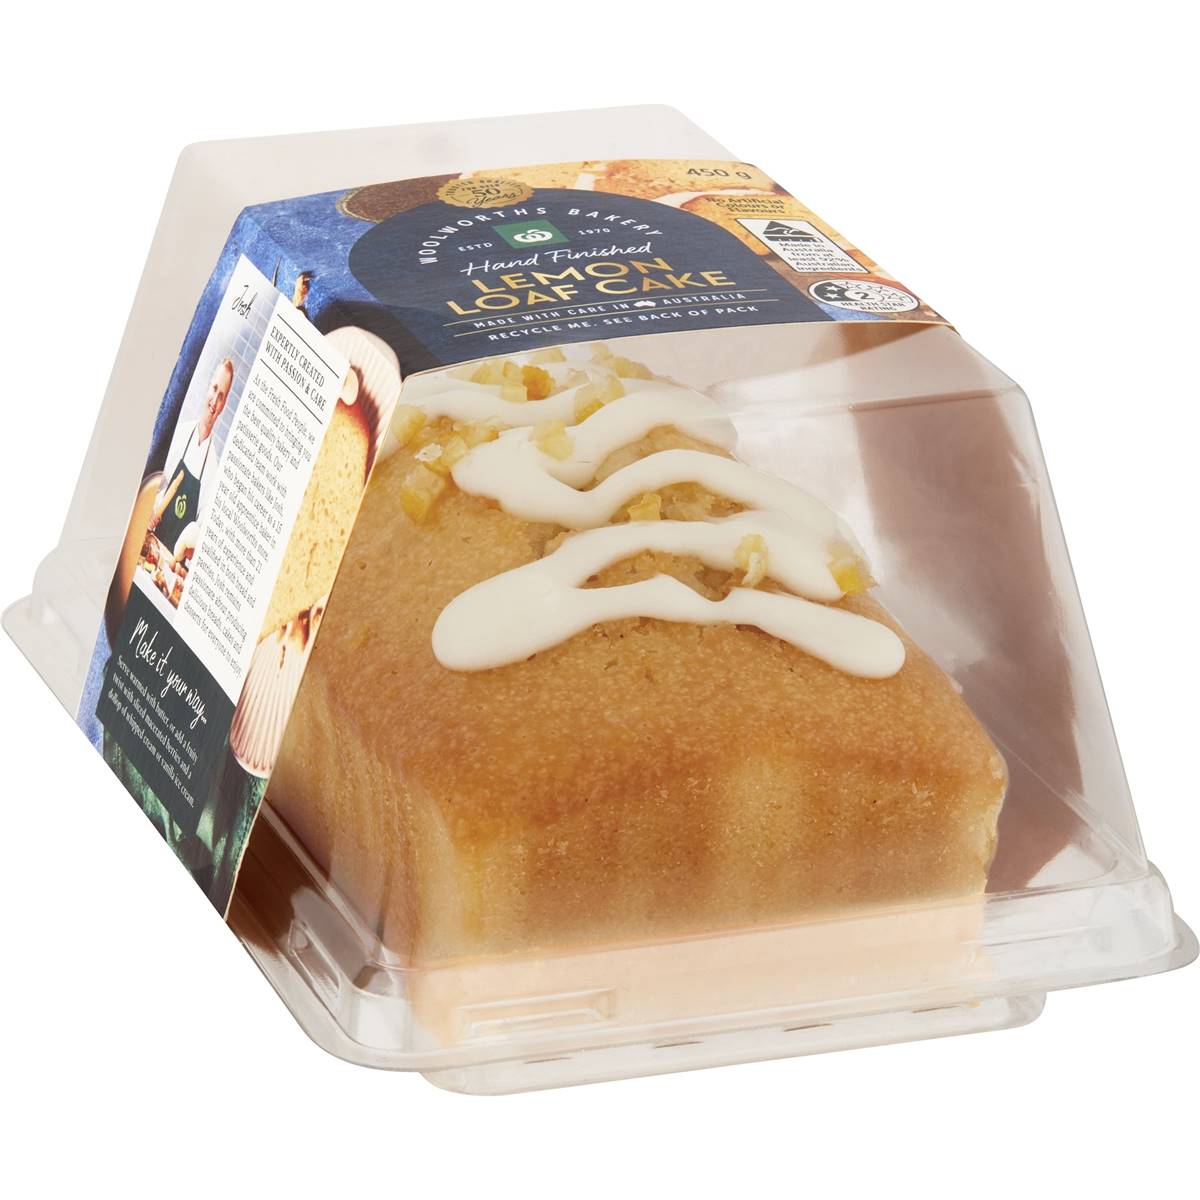 Calories in Woolworths Lemon Drizzle Loaf Cake